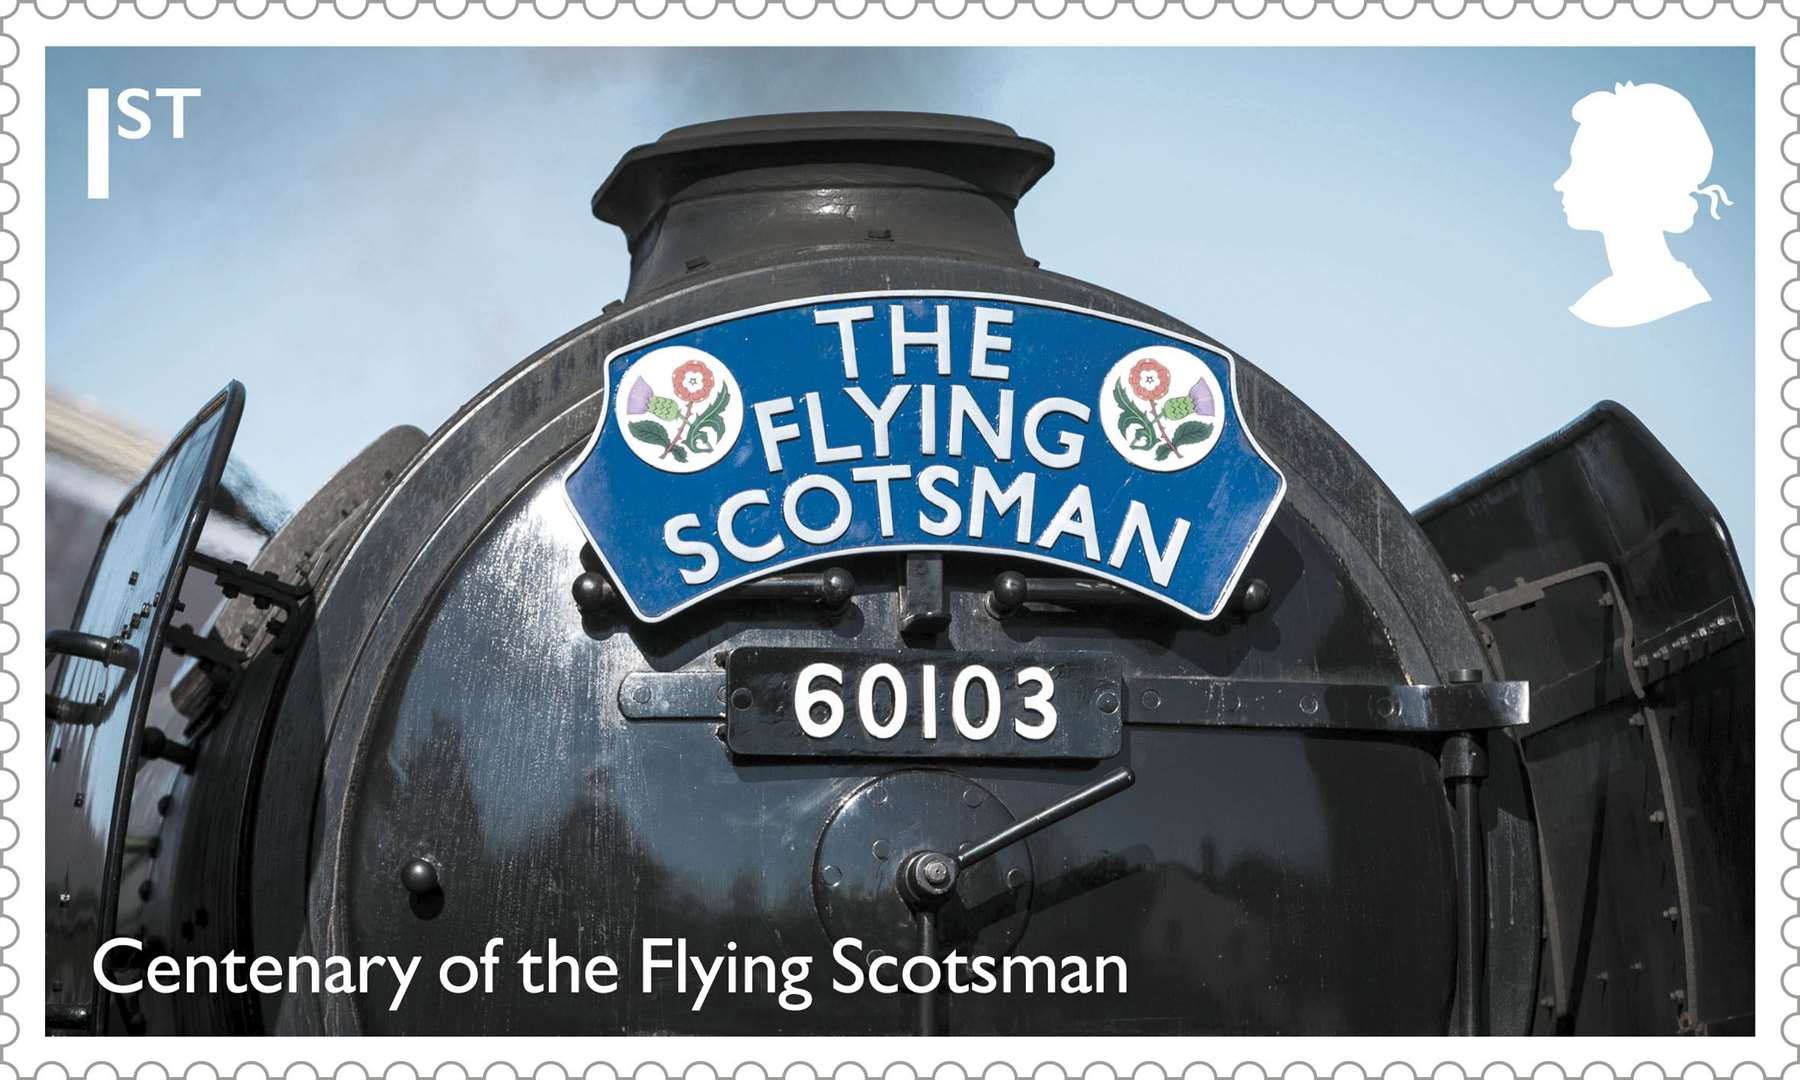 Special stamps to mark the centenary of the Flying Scotsman